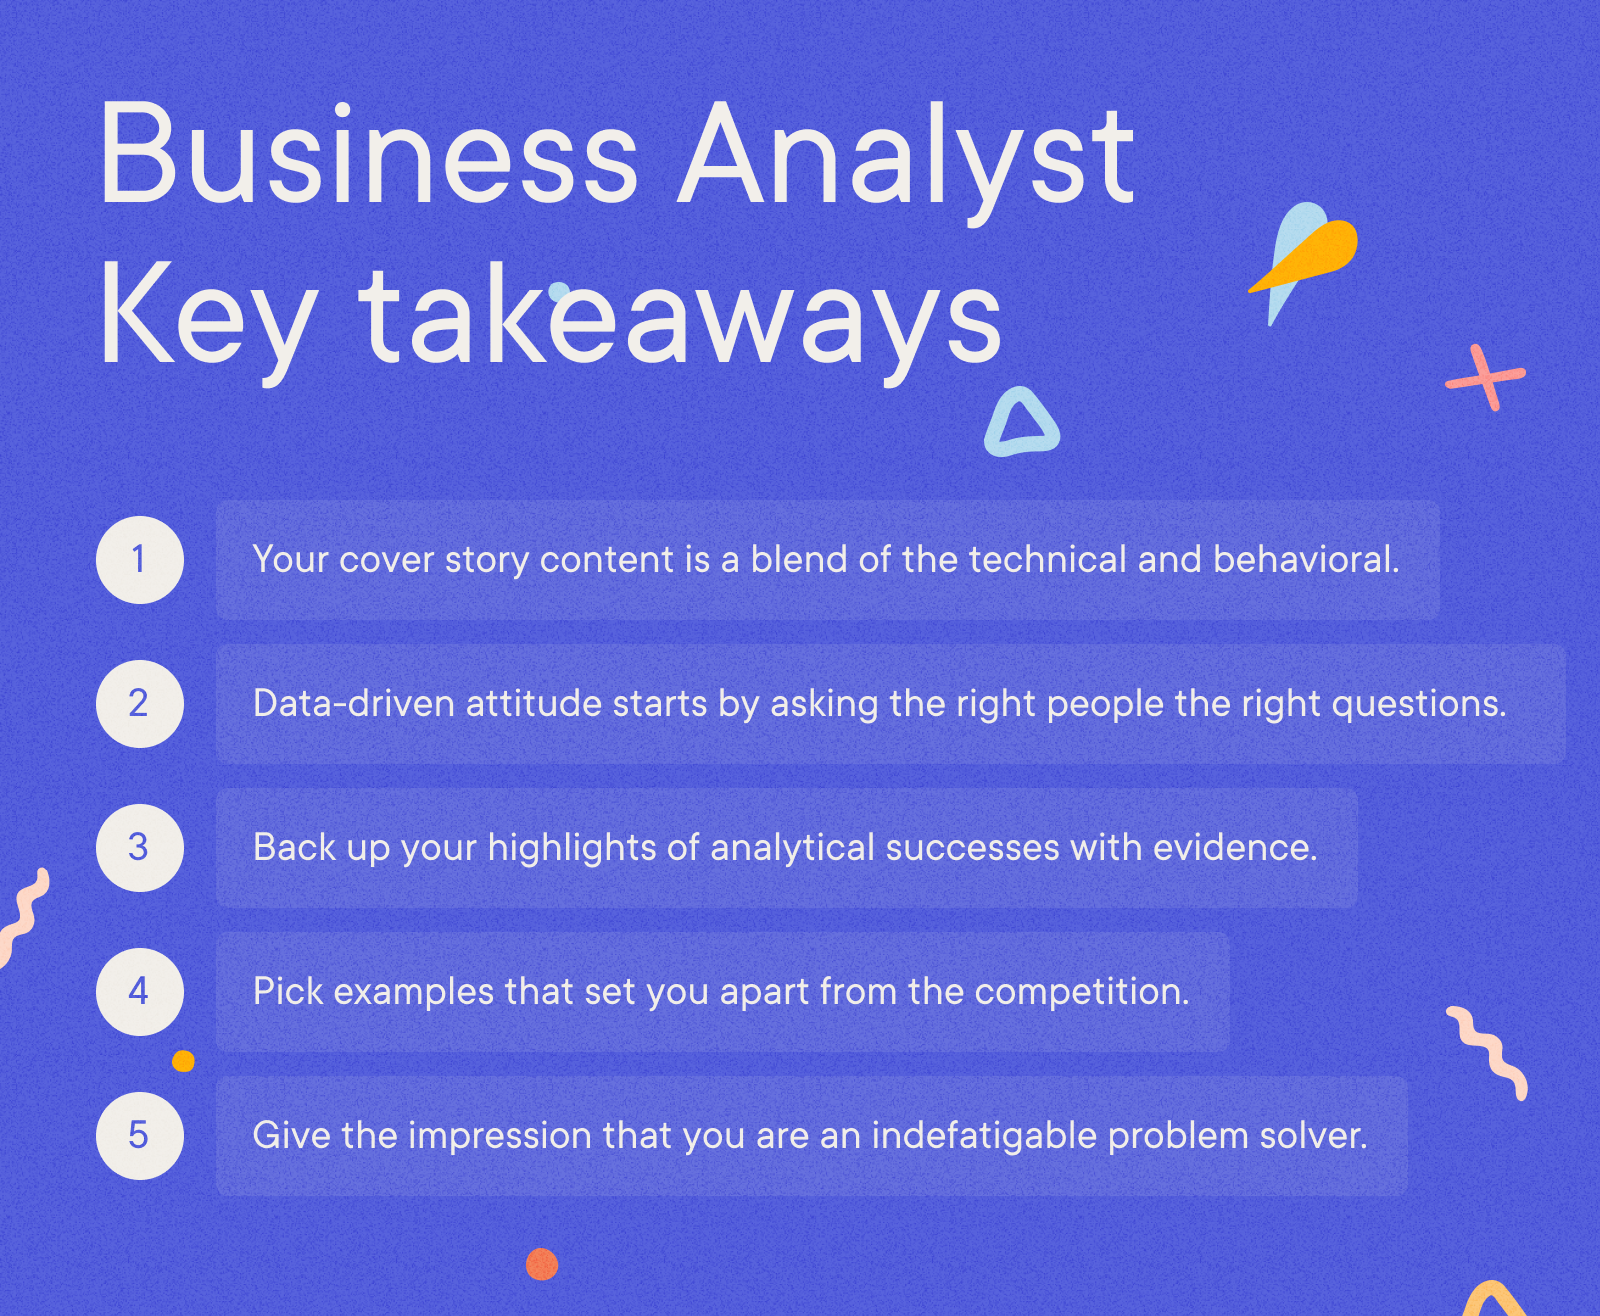 Business Analyst Cover Letter Example - Business Analyst Key takeaways